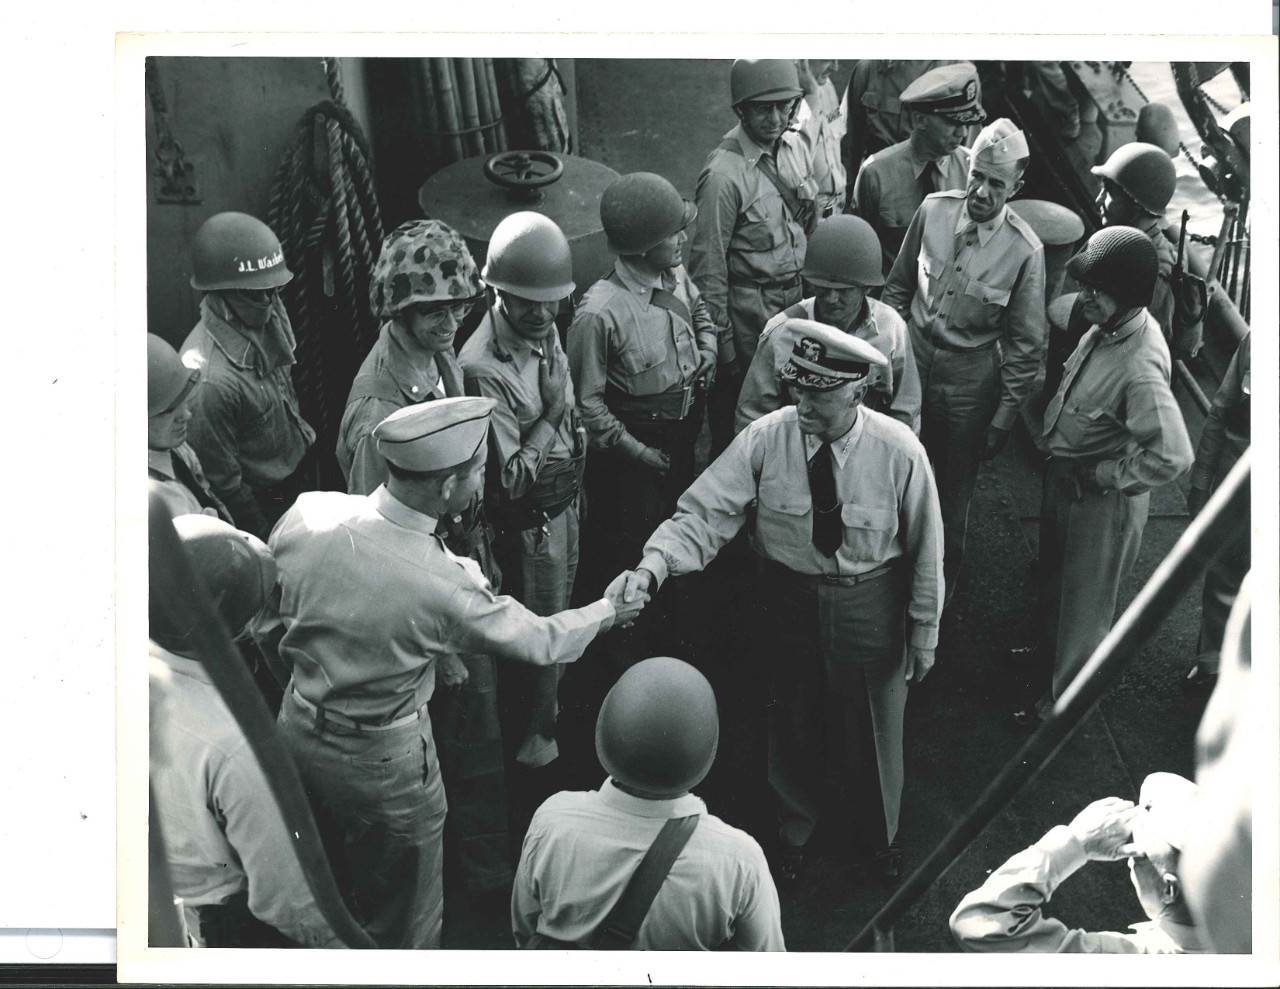 <p>Admiral Chester W. Nimitz greeting Navy personnel during the Iwo Jima campaign</p>
